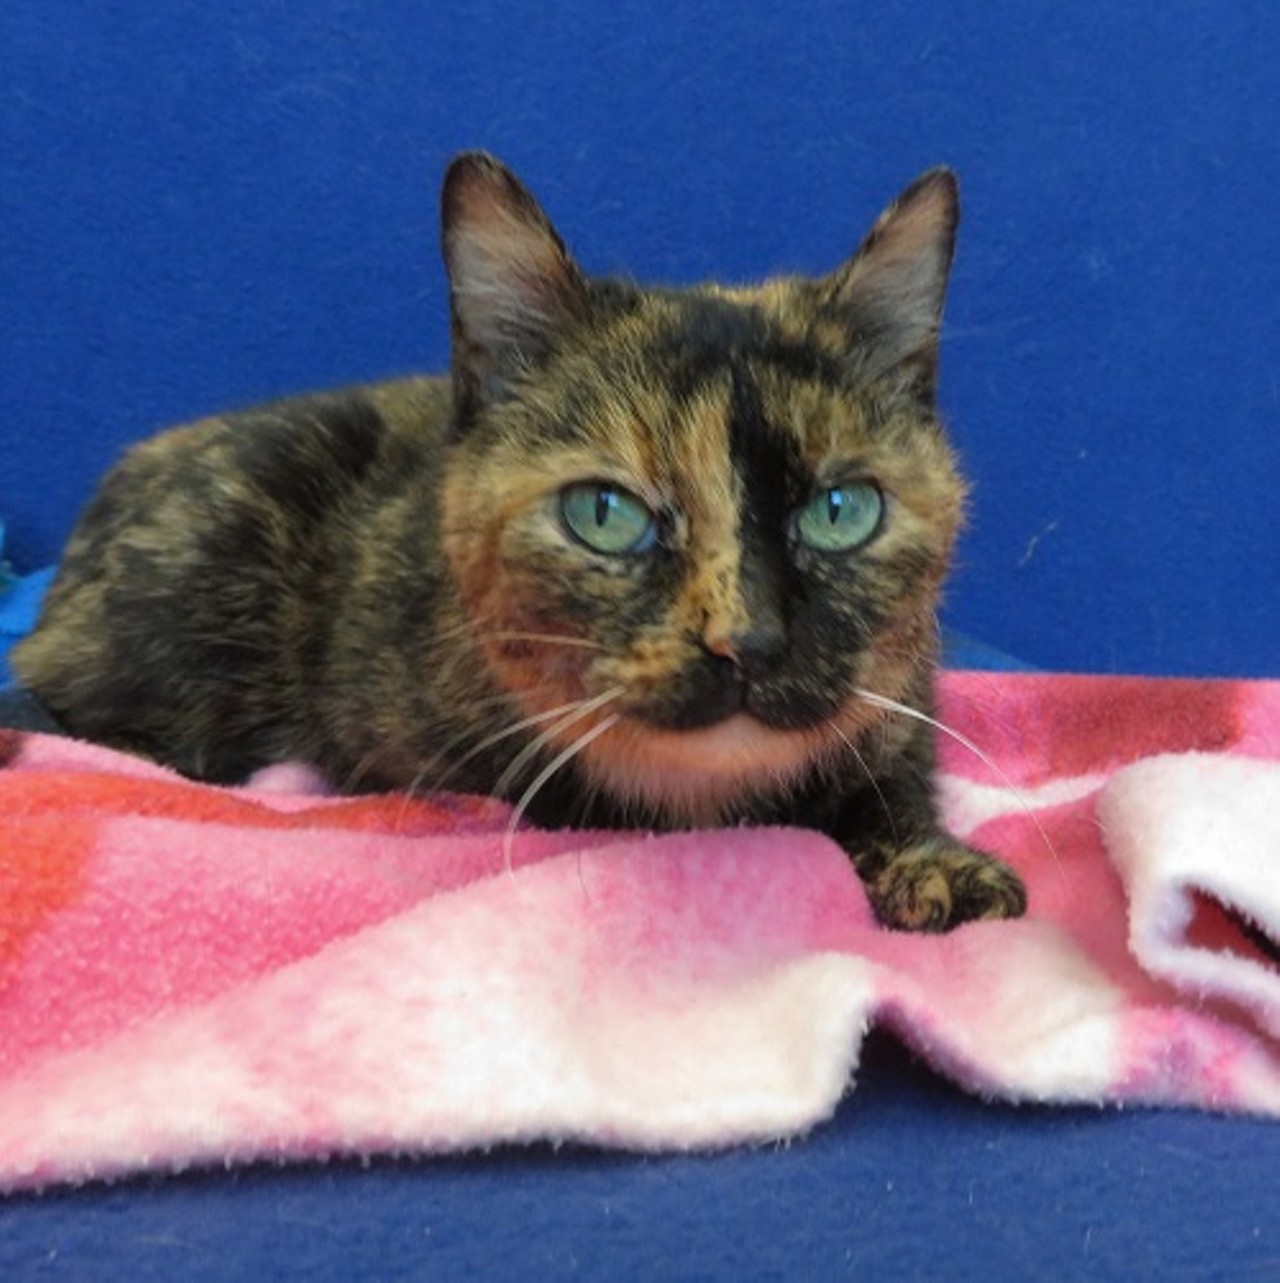 NAME: Mirage
NAME: Mirage
GENDER: Female
BREED: Domestic Short Hair
AGE: 10 years
WEIGHT: 7 pounds
SPECIAL CONSIDERATIONS: None
REASON I CAME TO MHS: Owner surrender
LOCATION: Mackey Center for Animal Care in Detroit
ID NUMBER: 862254